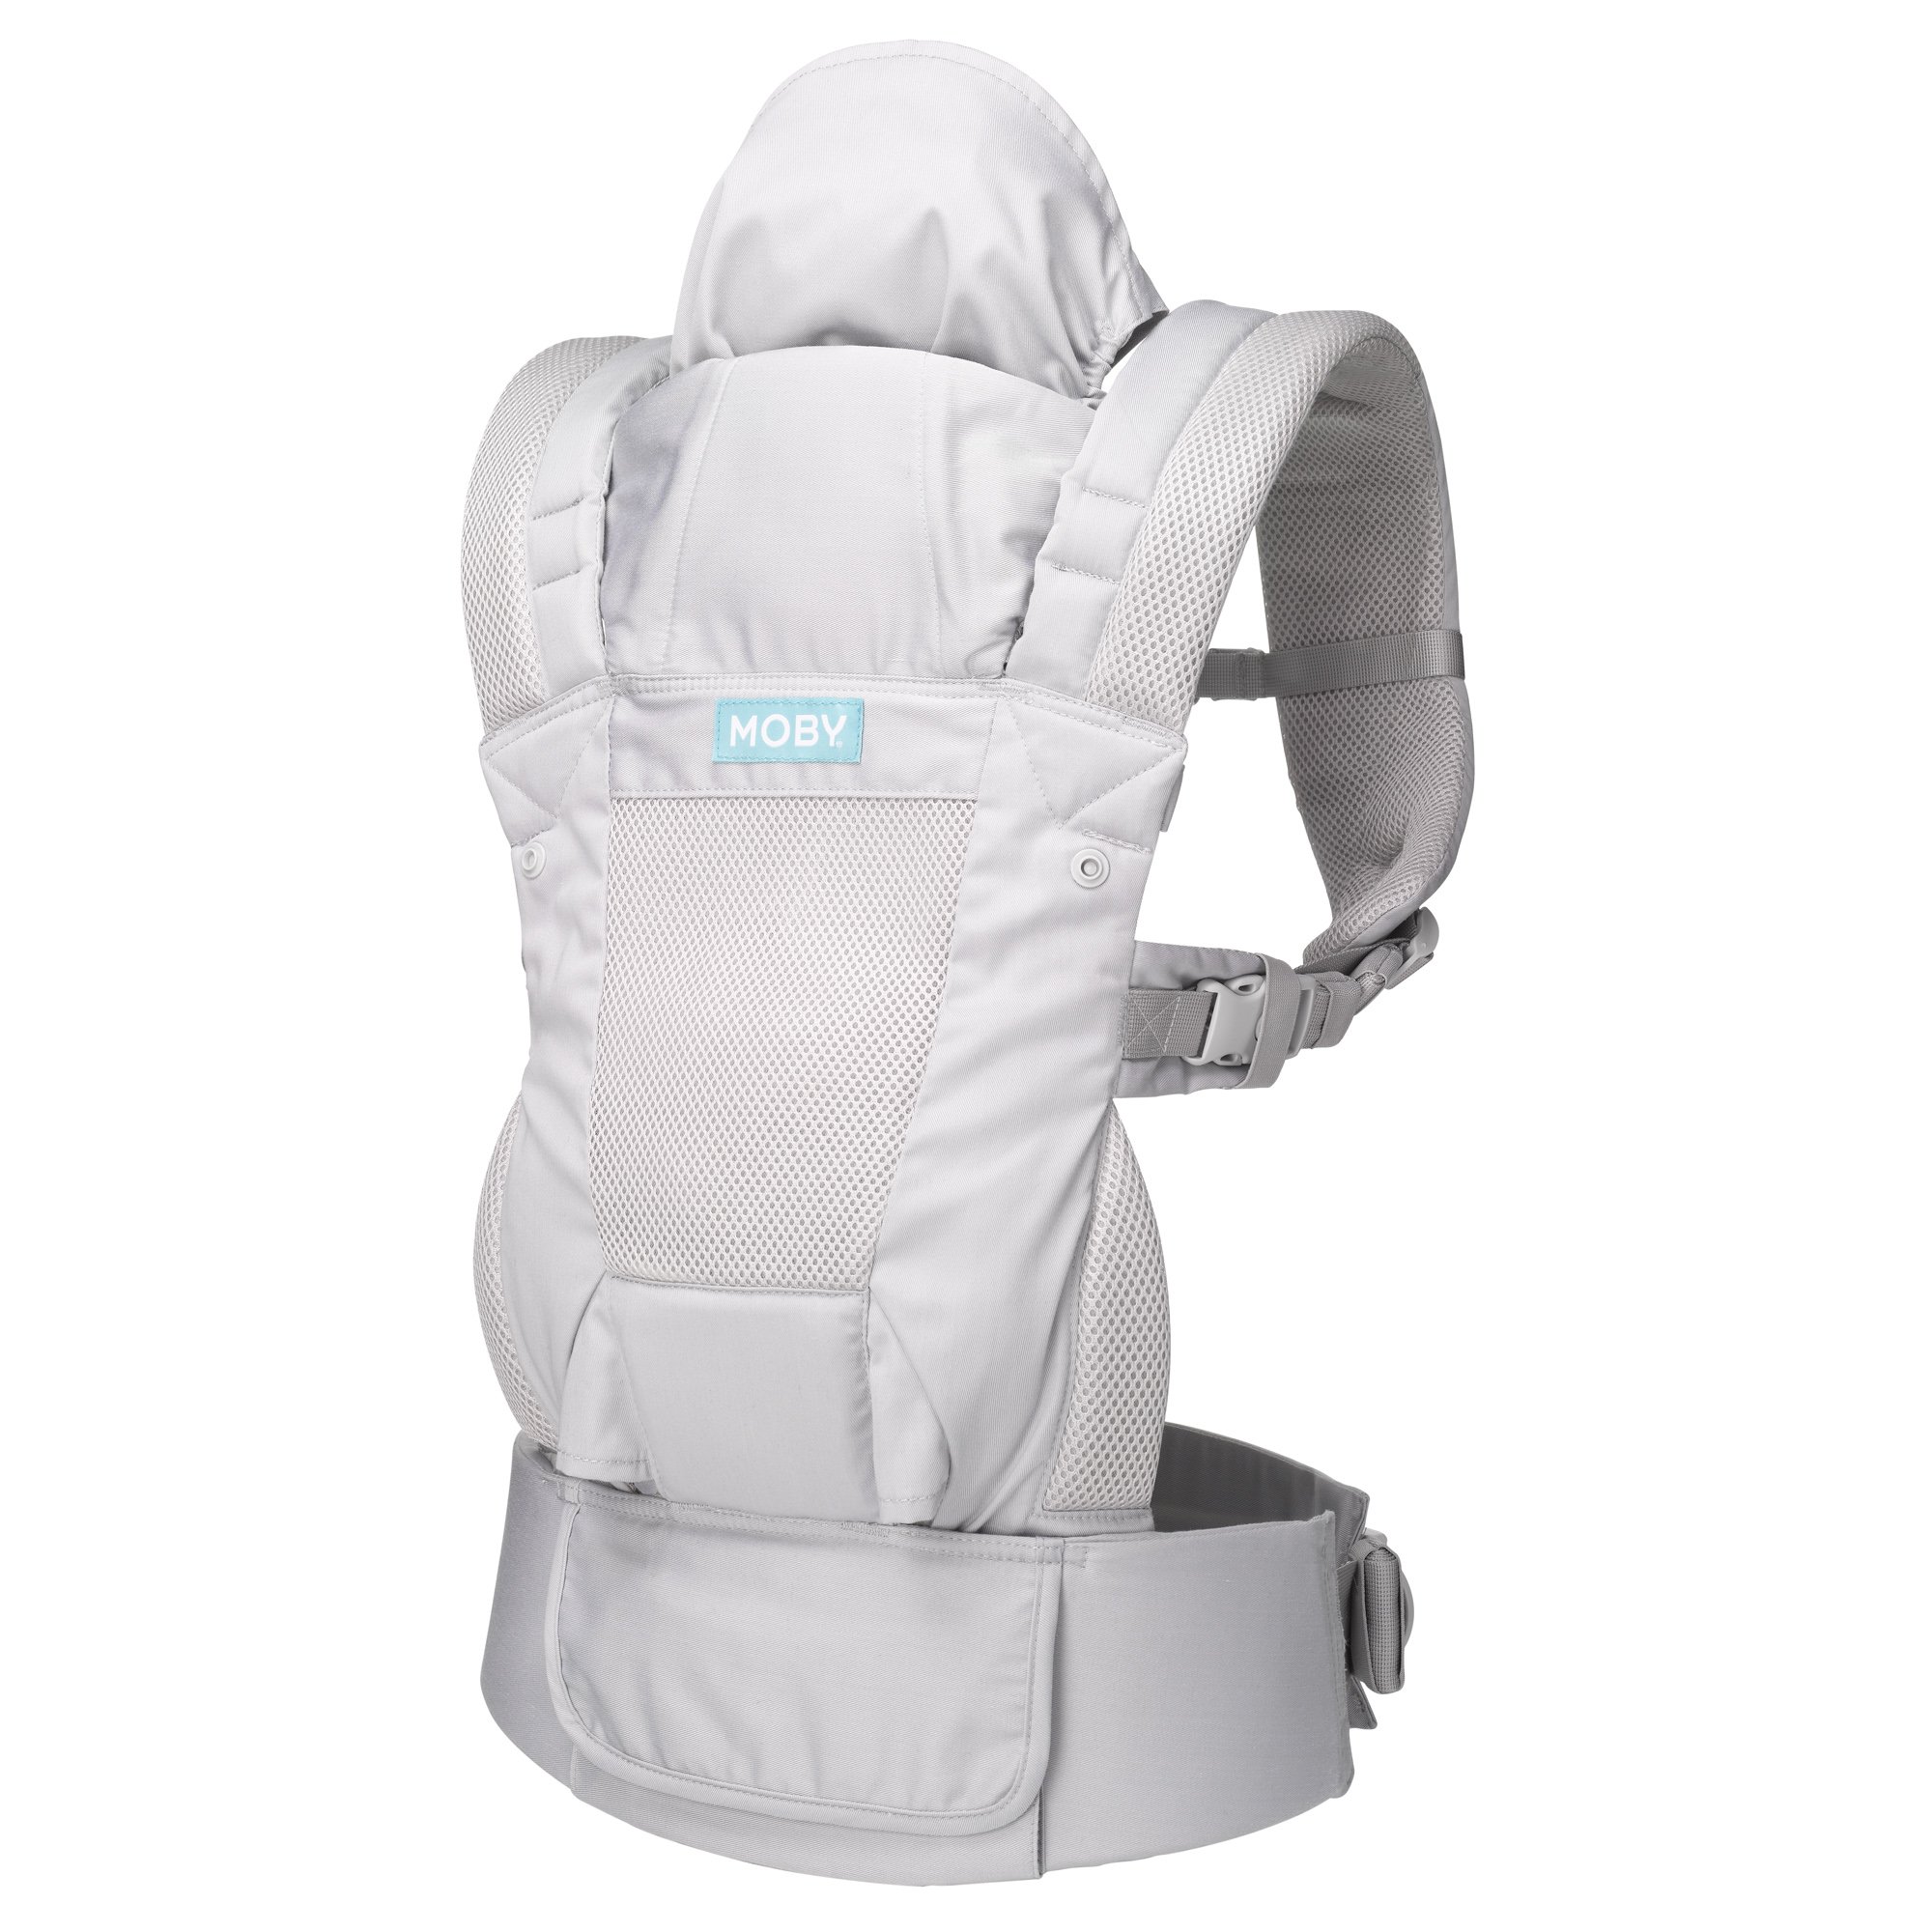 Moby Move Infant All-Position Carrier M-MOVE-GG - Glacier Grey 2